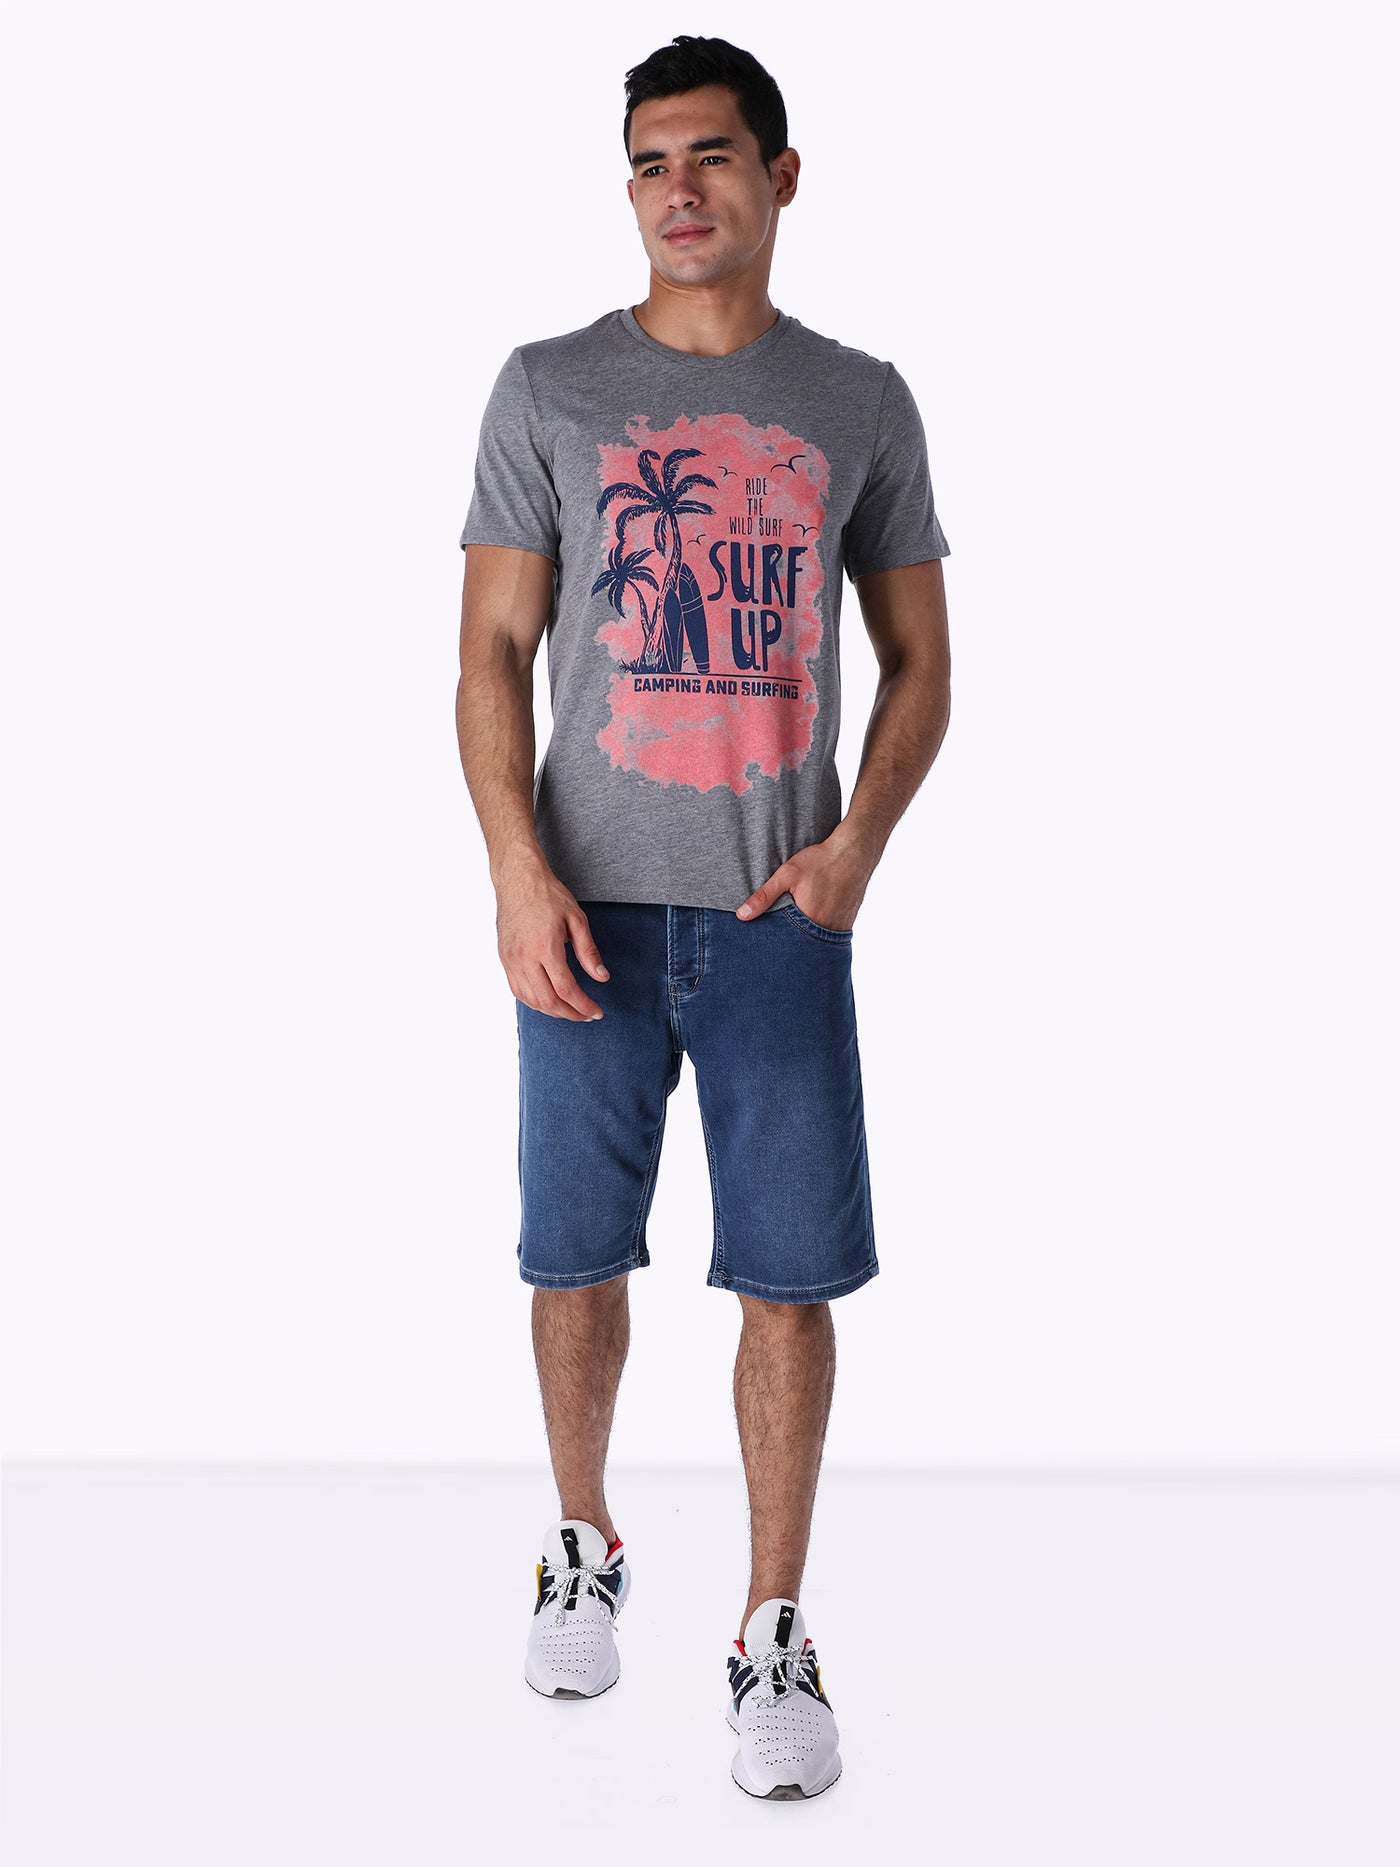 OR Men's Front Camping and Surfing Printed T-shirt